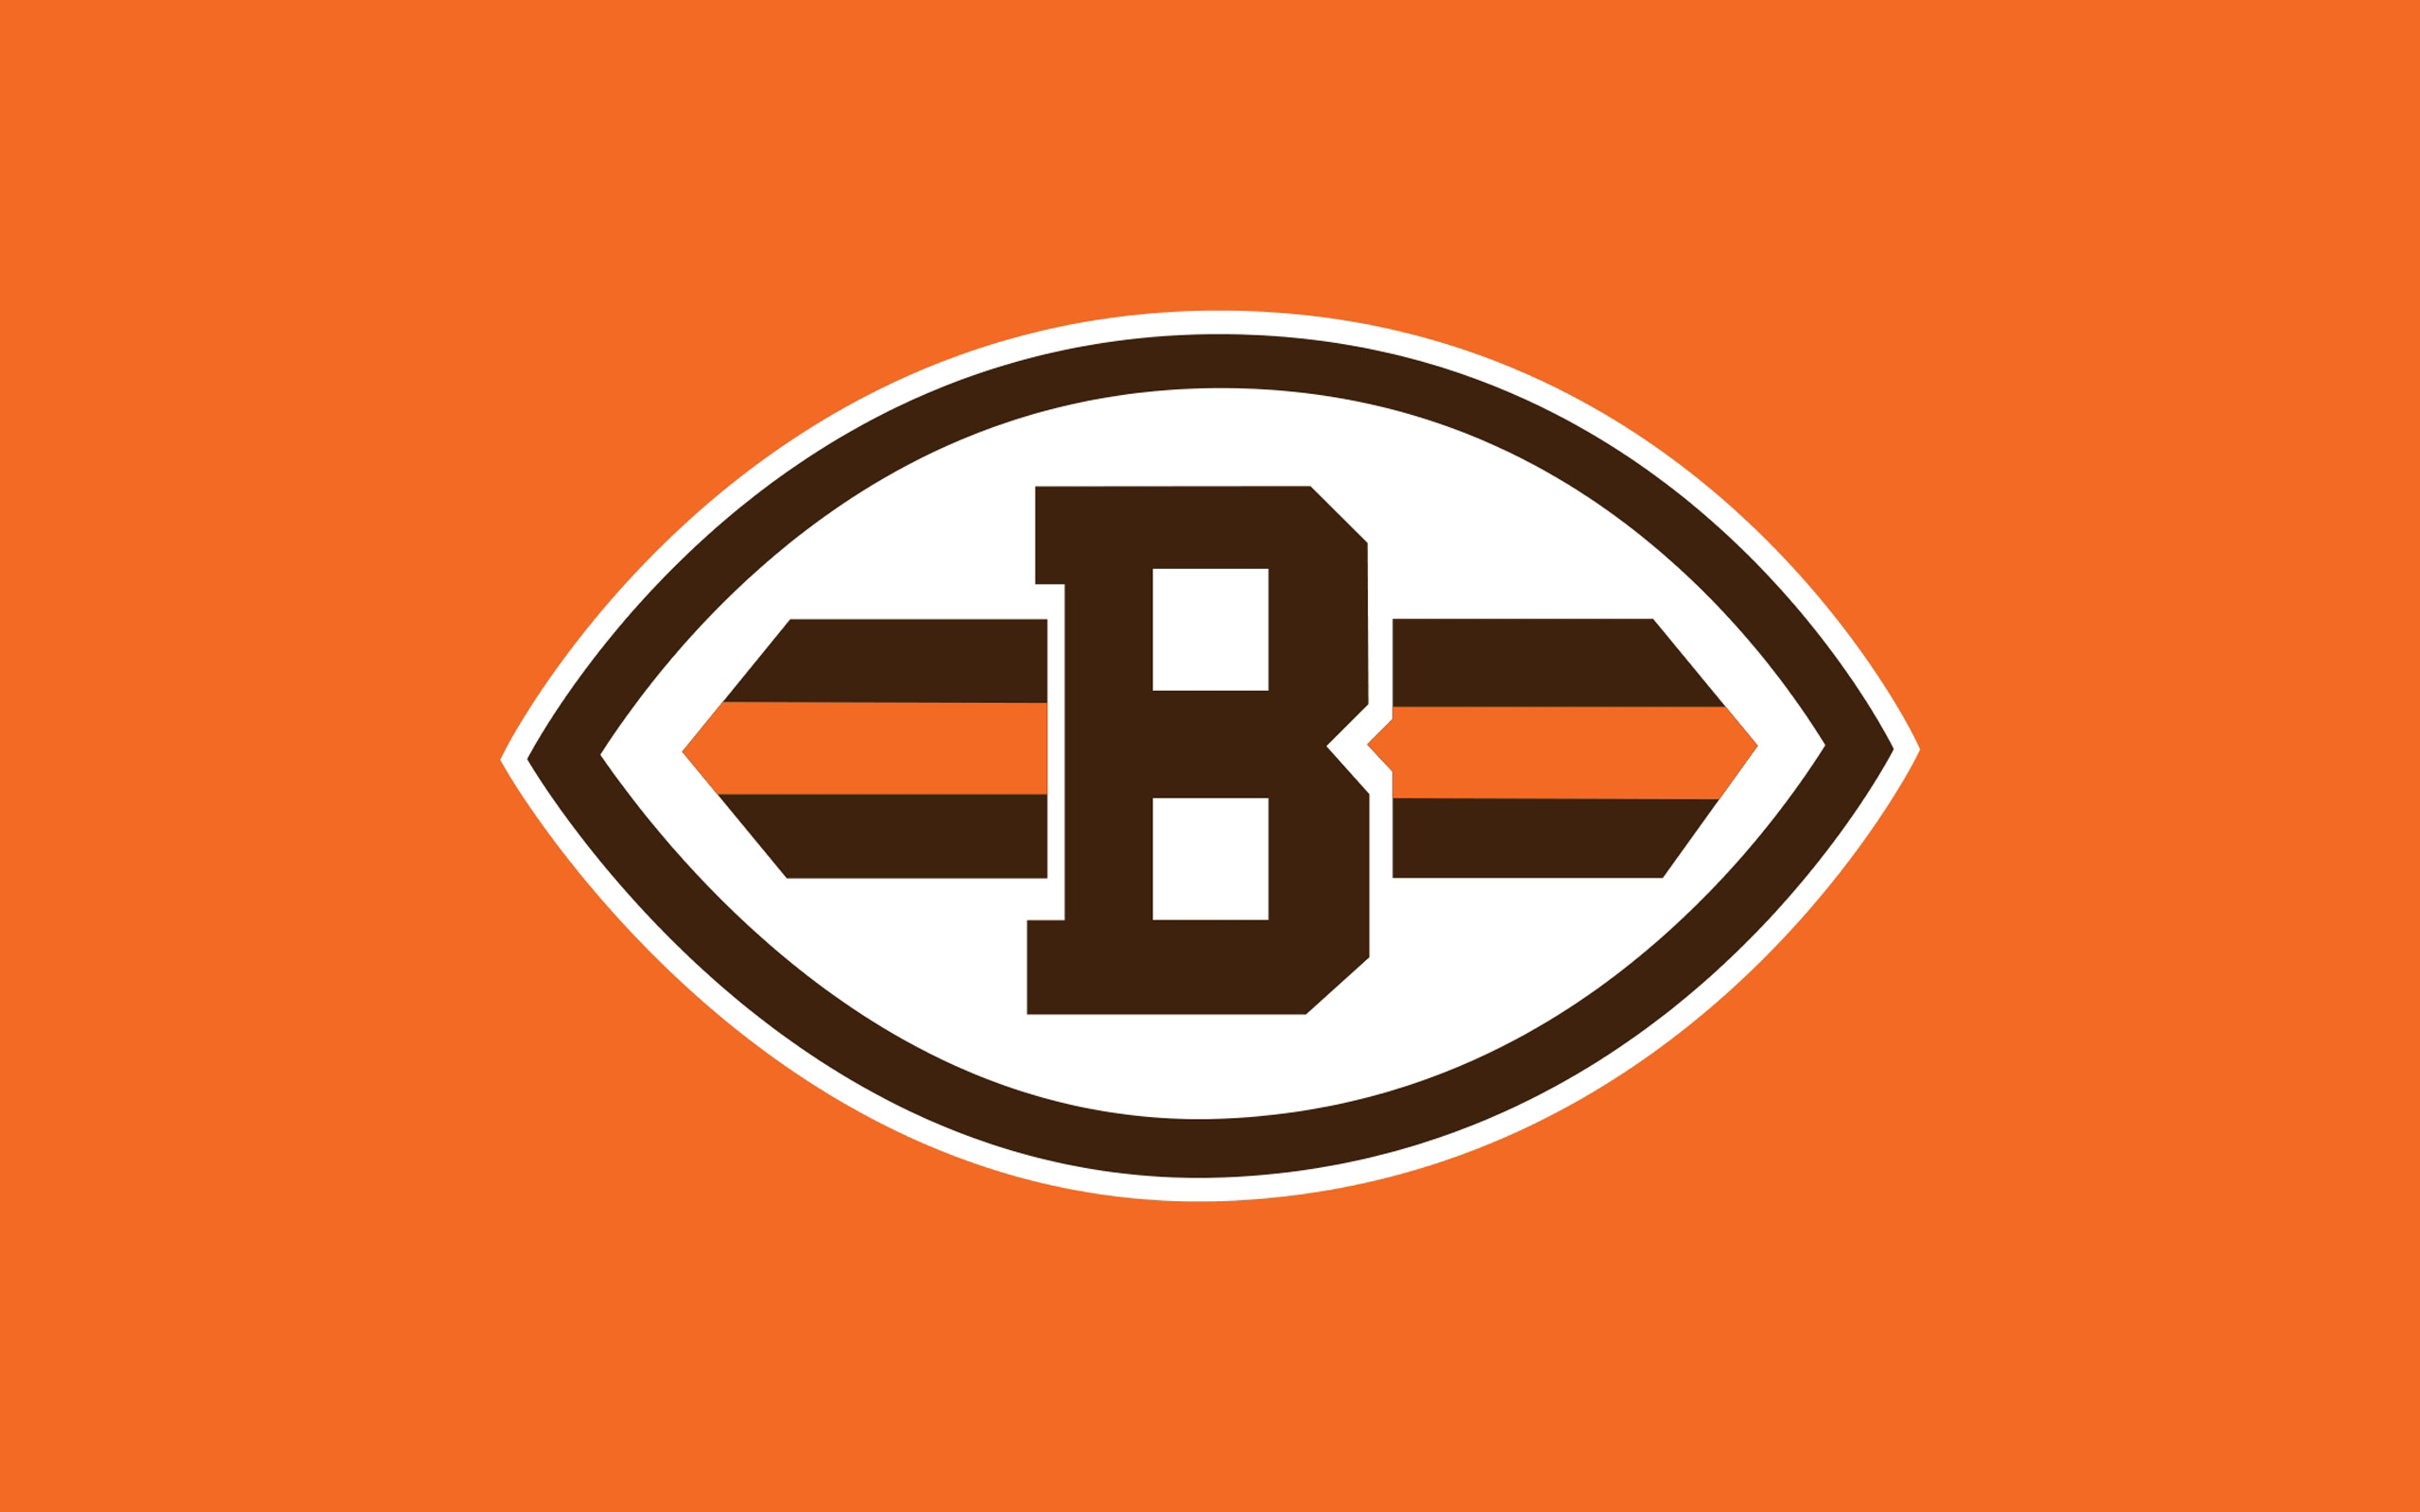 Cleveland Browns Nfl Wallpaper Share This Team On